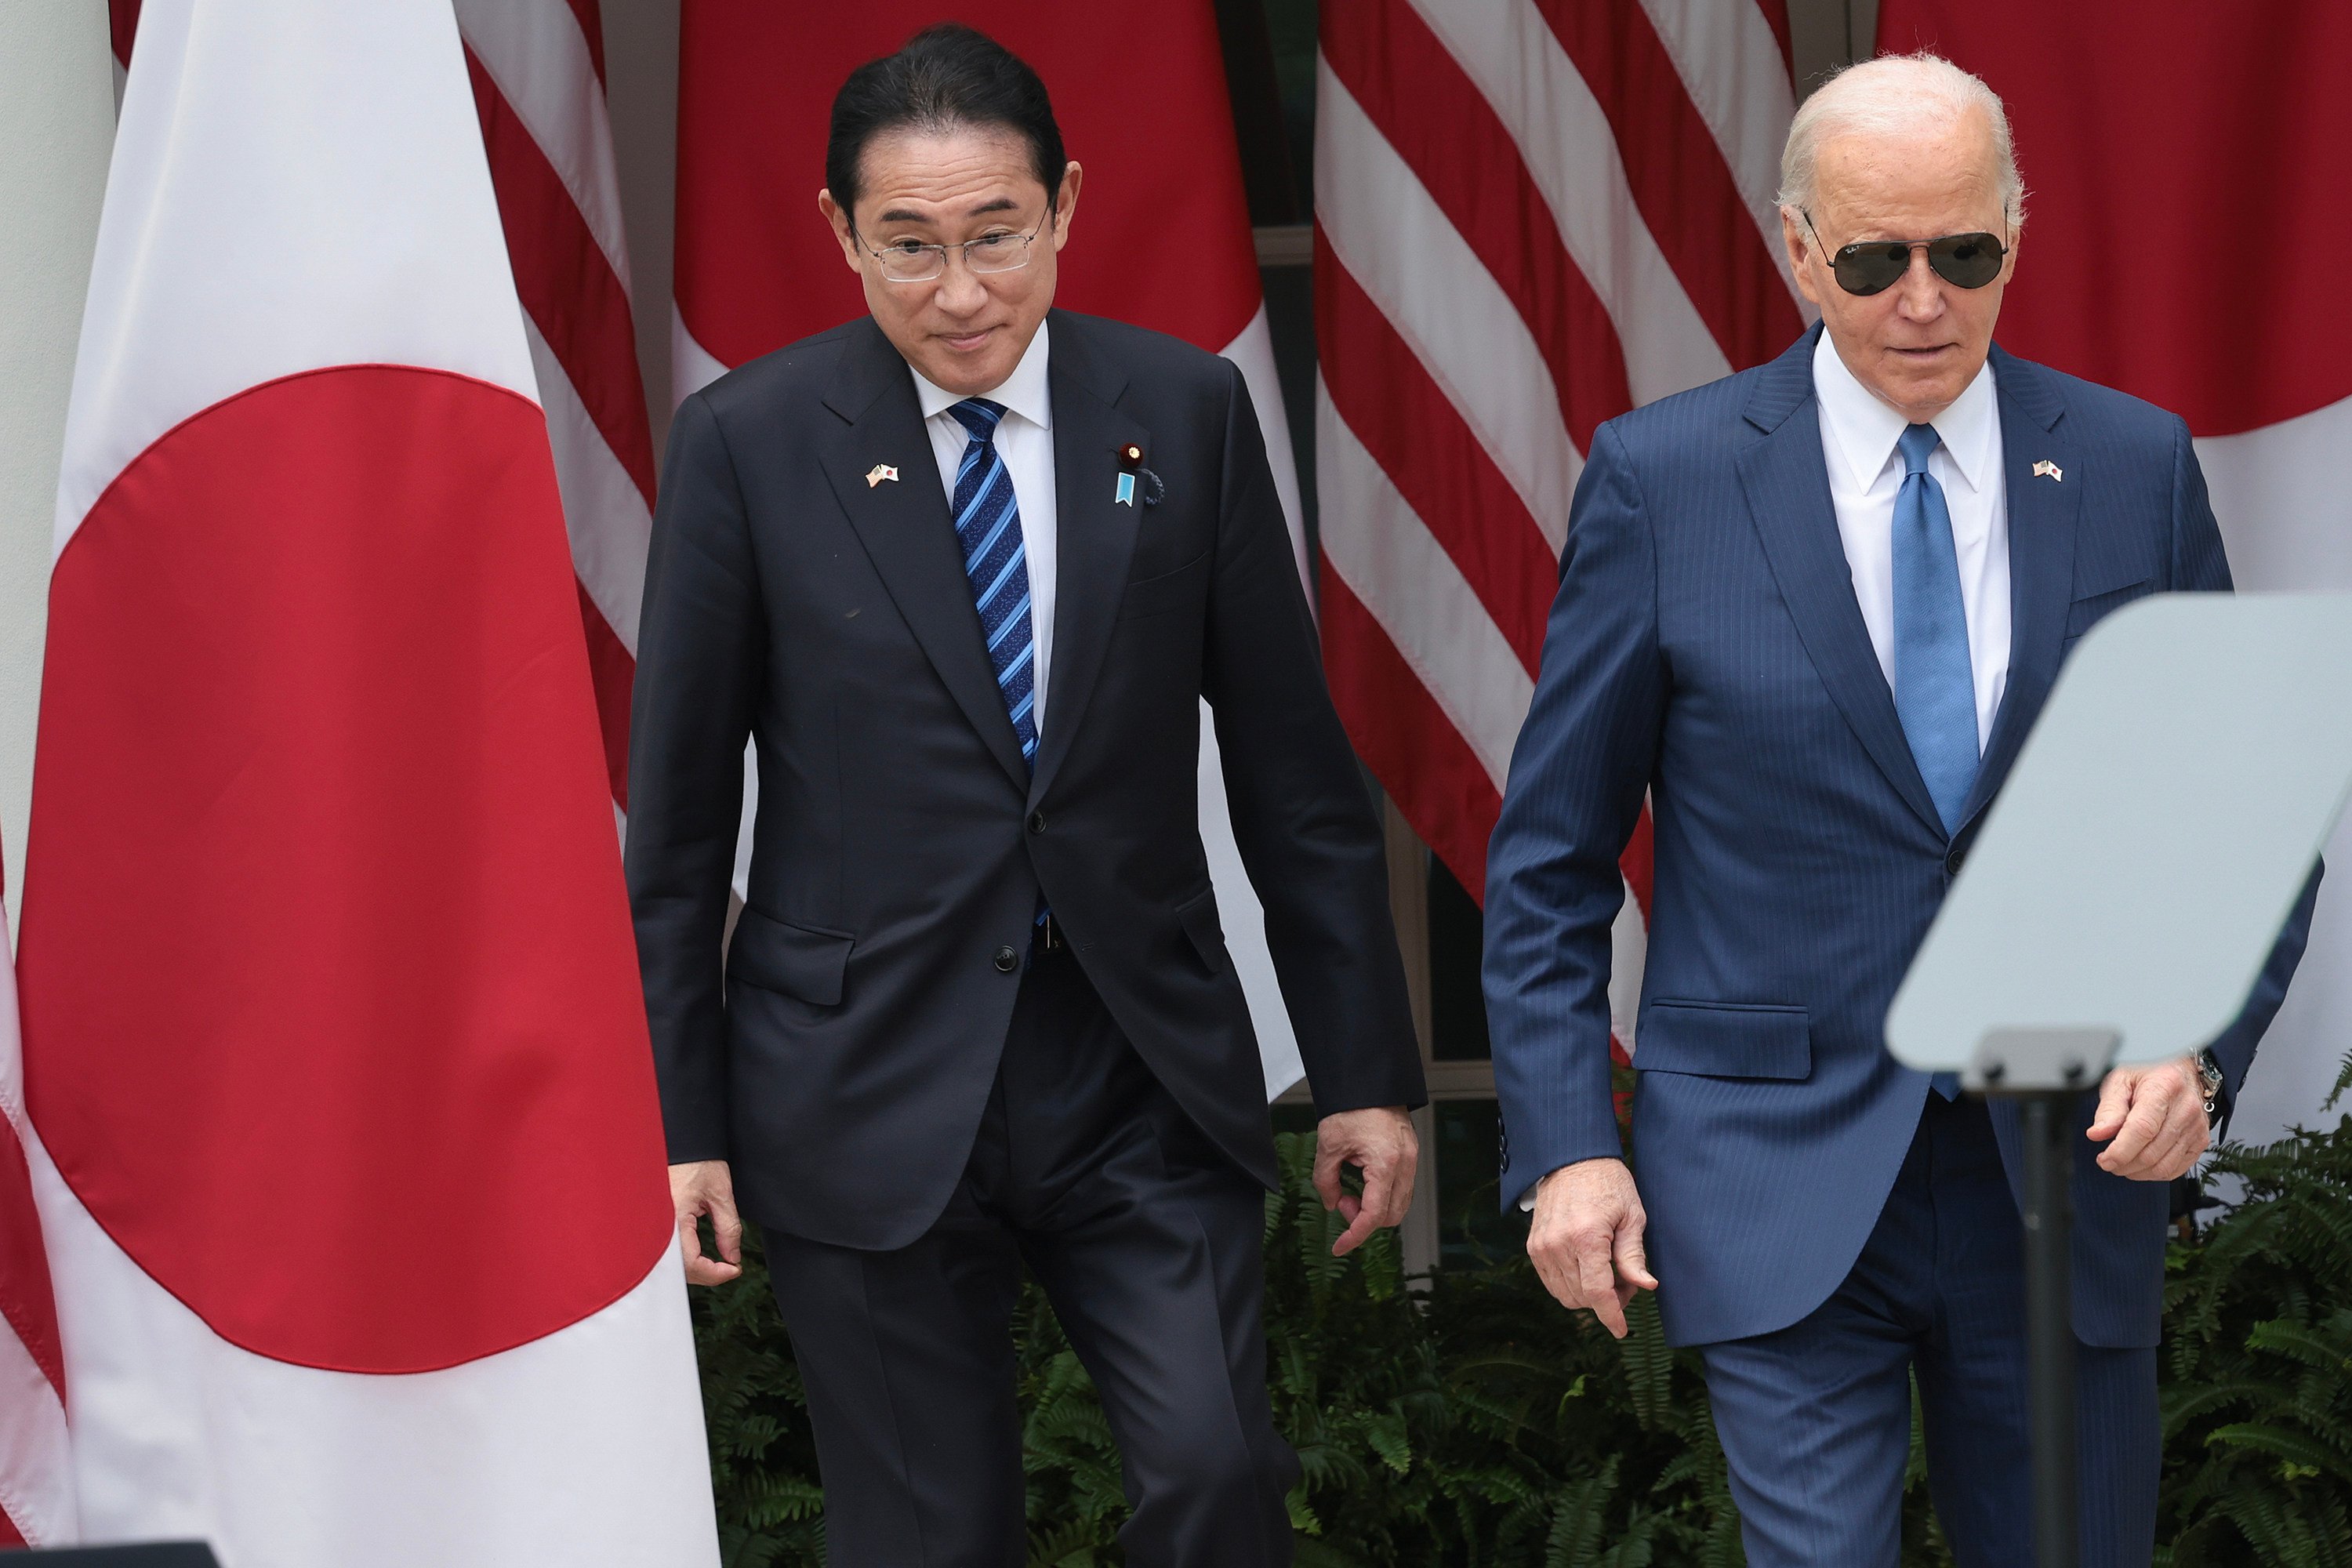 US President Joe Biden and Japanese Prime Minister Fumio Kishida arrive for a joint press conference at the White House last month. Photo: TNS